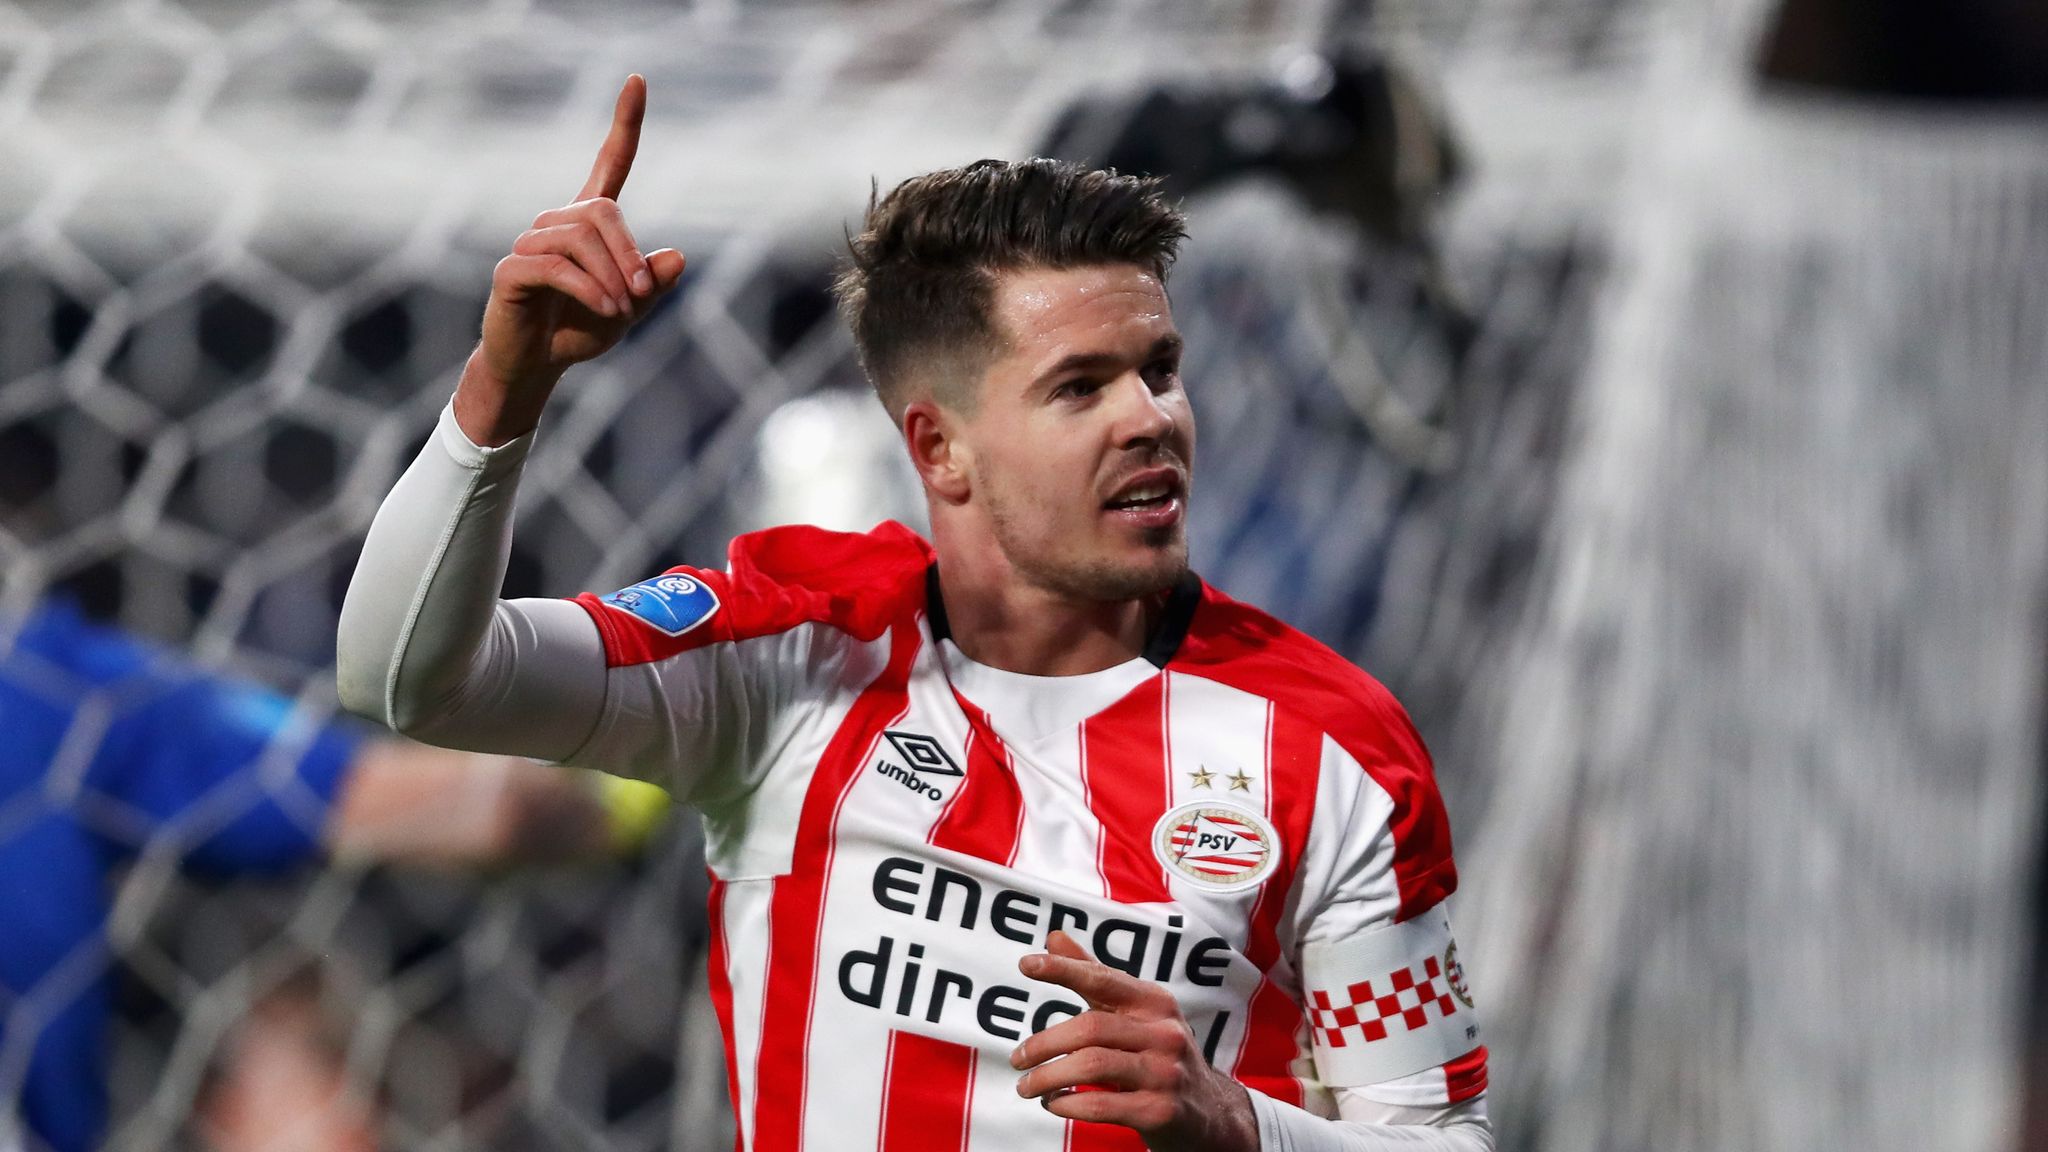 PSV  Dutch Soccer / Football site – news and events